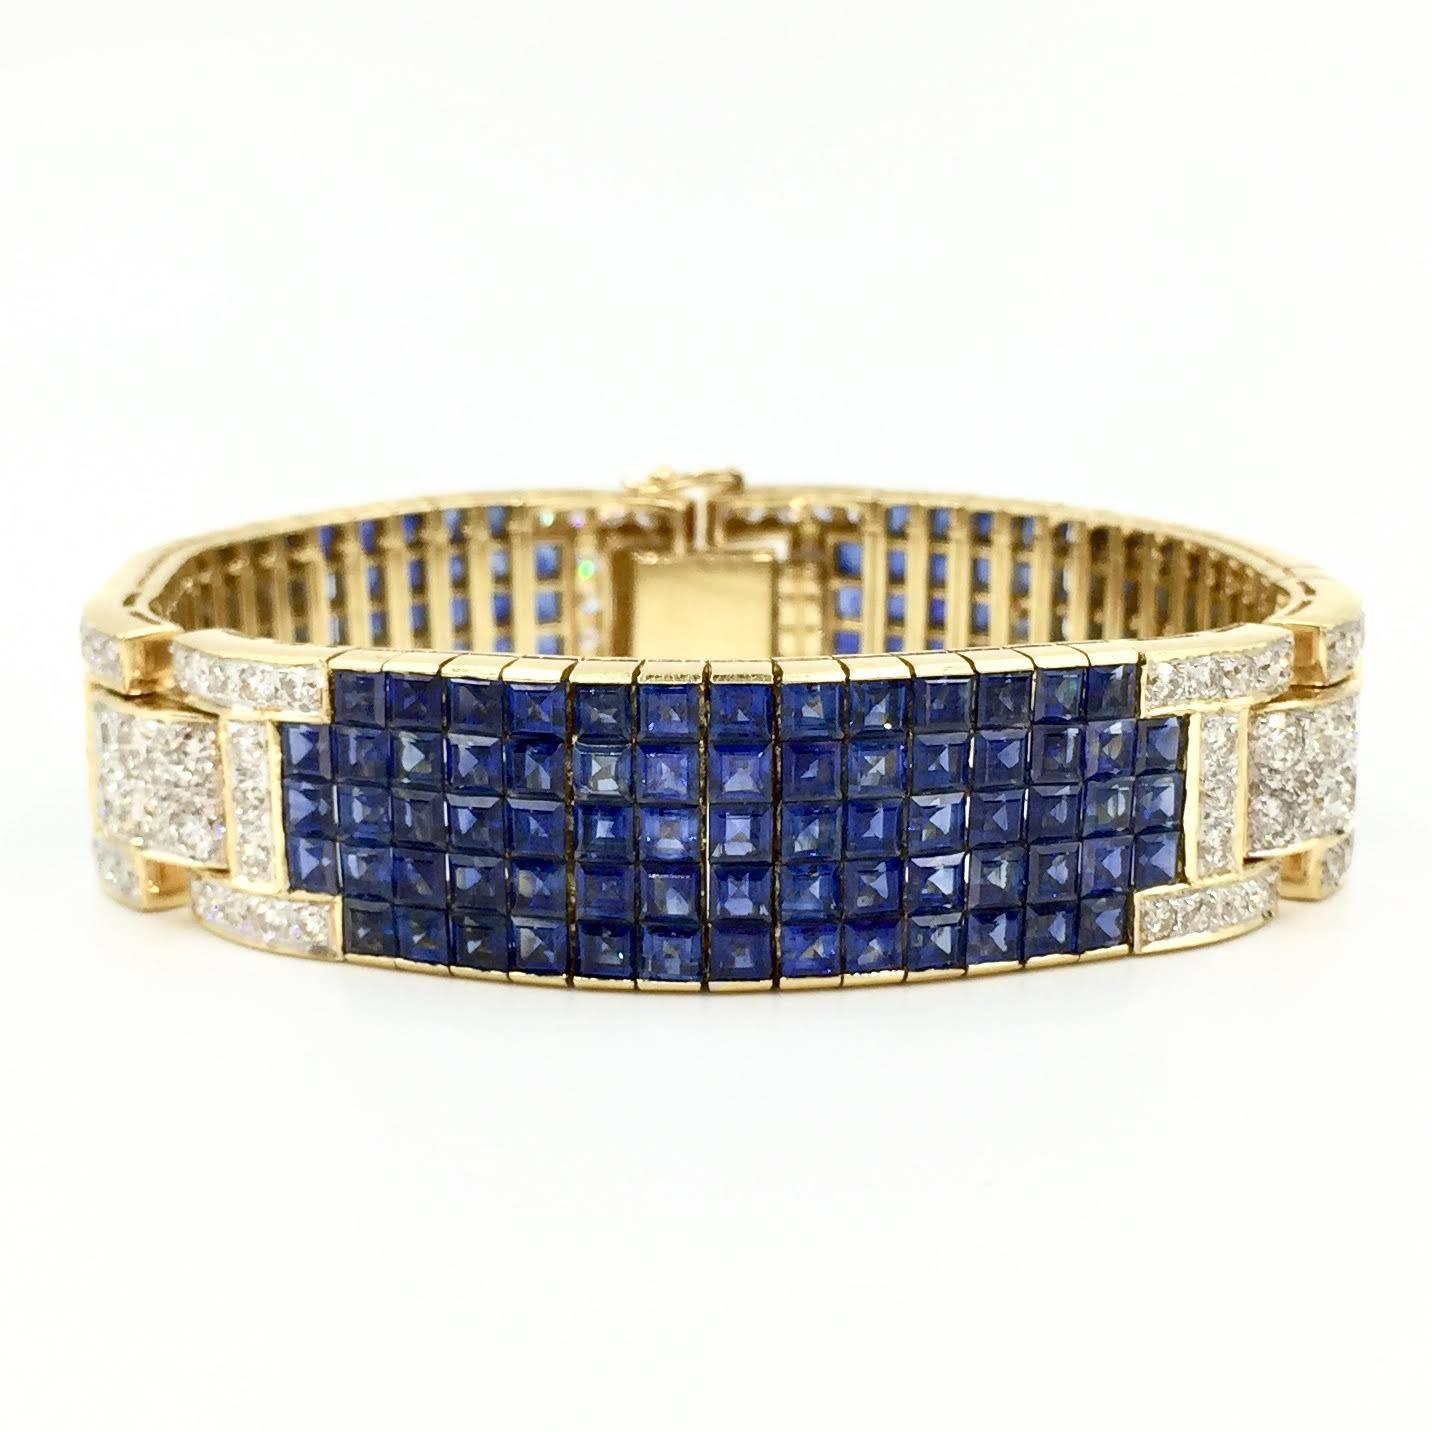 Sapphire and Diamond Wide Bracelet 18K Yellow Gold Approx. 35 Carats Sapphire TW In Excellent Condition For Sale In Pikesville, MD